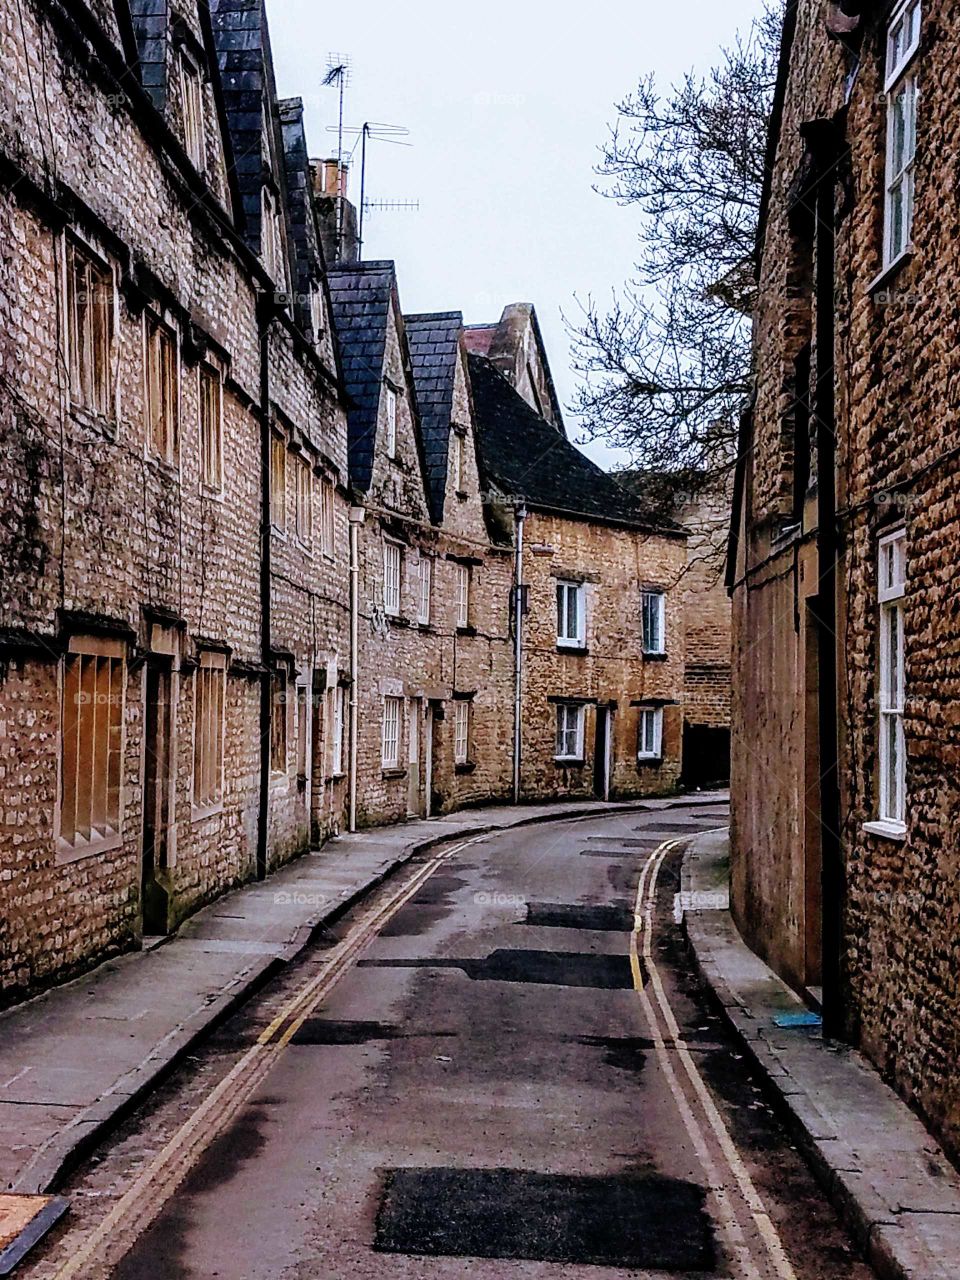 A street in the Cotswolds